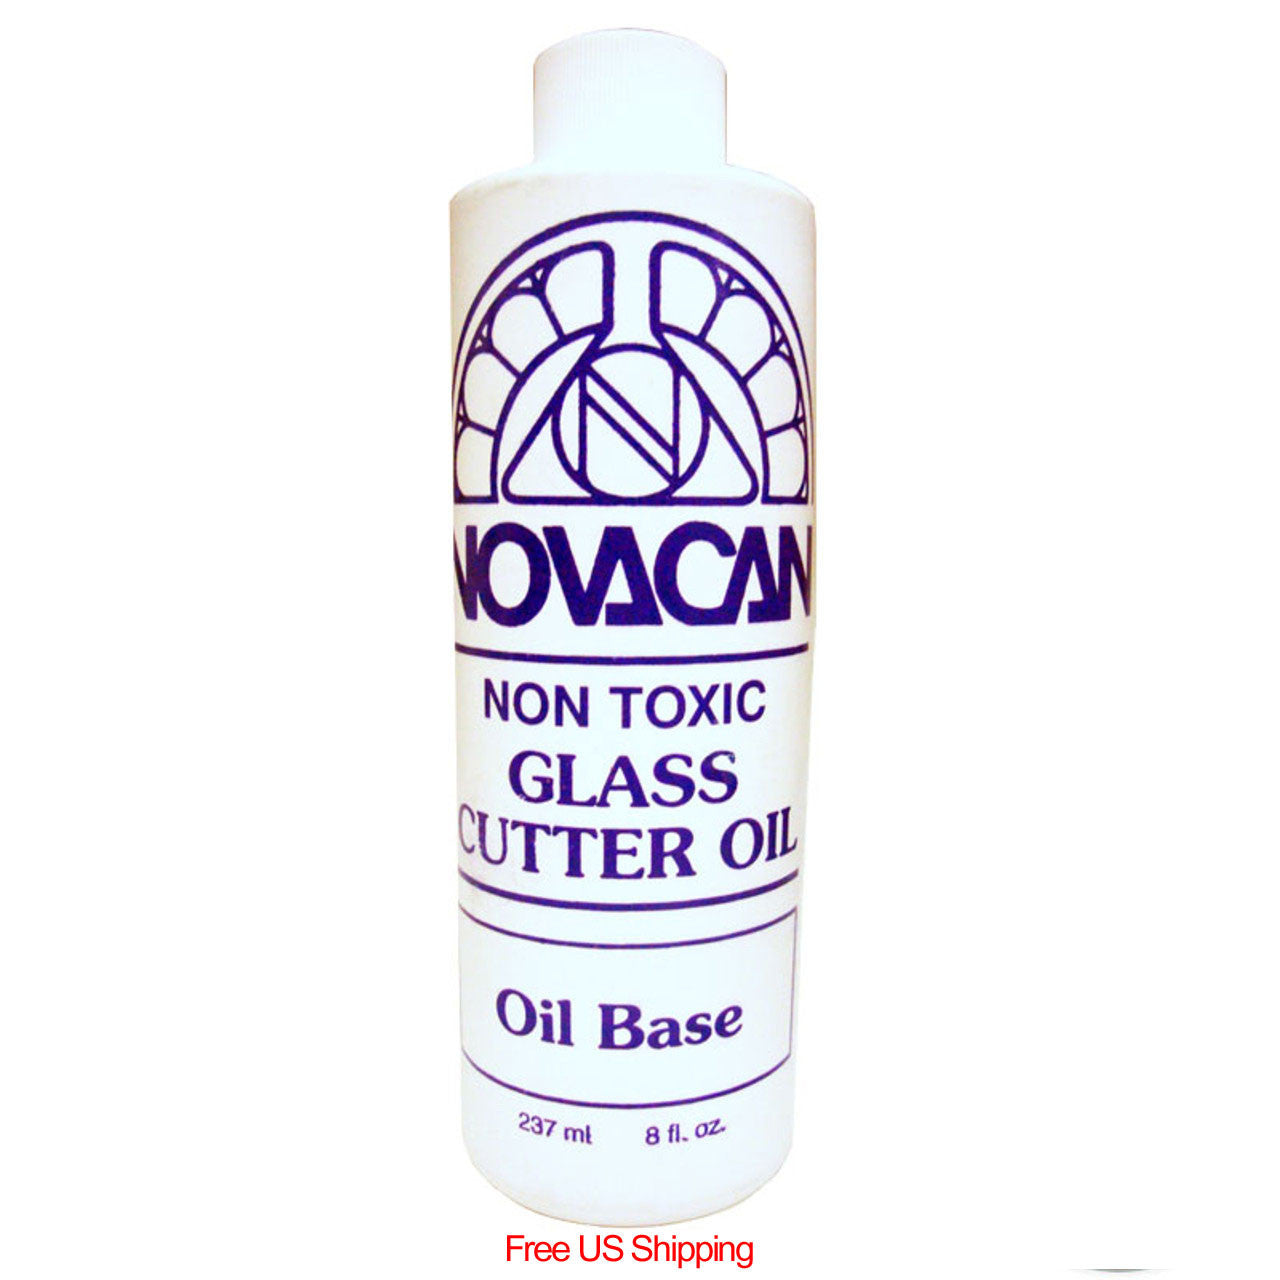 Glass Tool - Glass Cutter Oil 8 oz by Novacan Free US Shipping (41520-E)